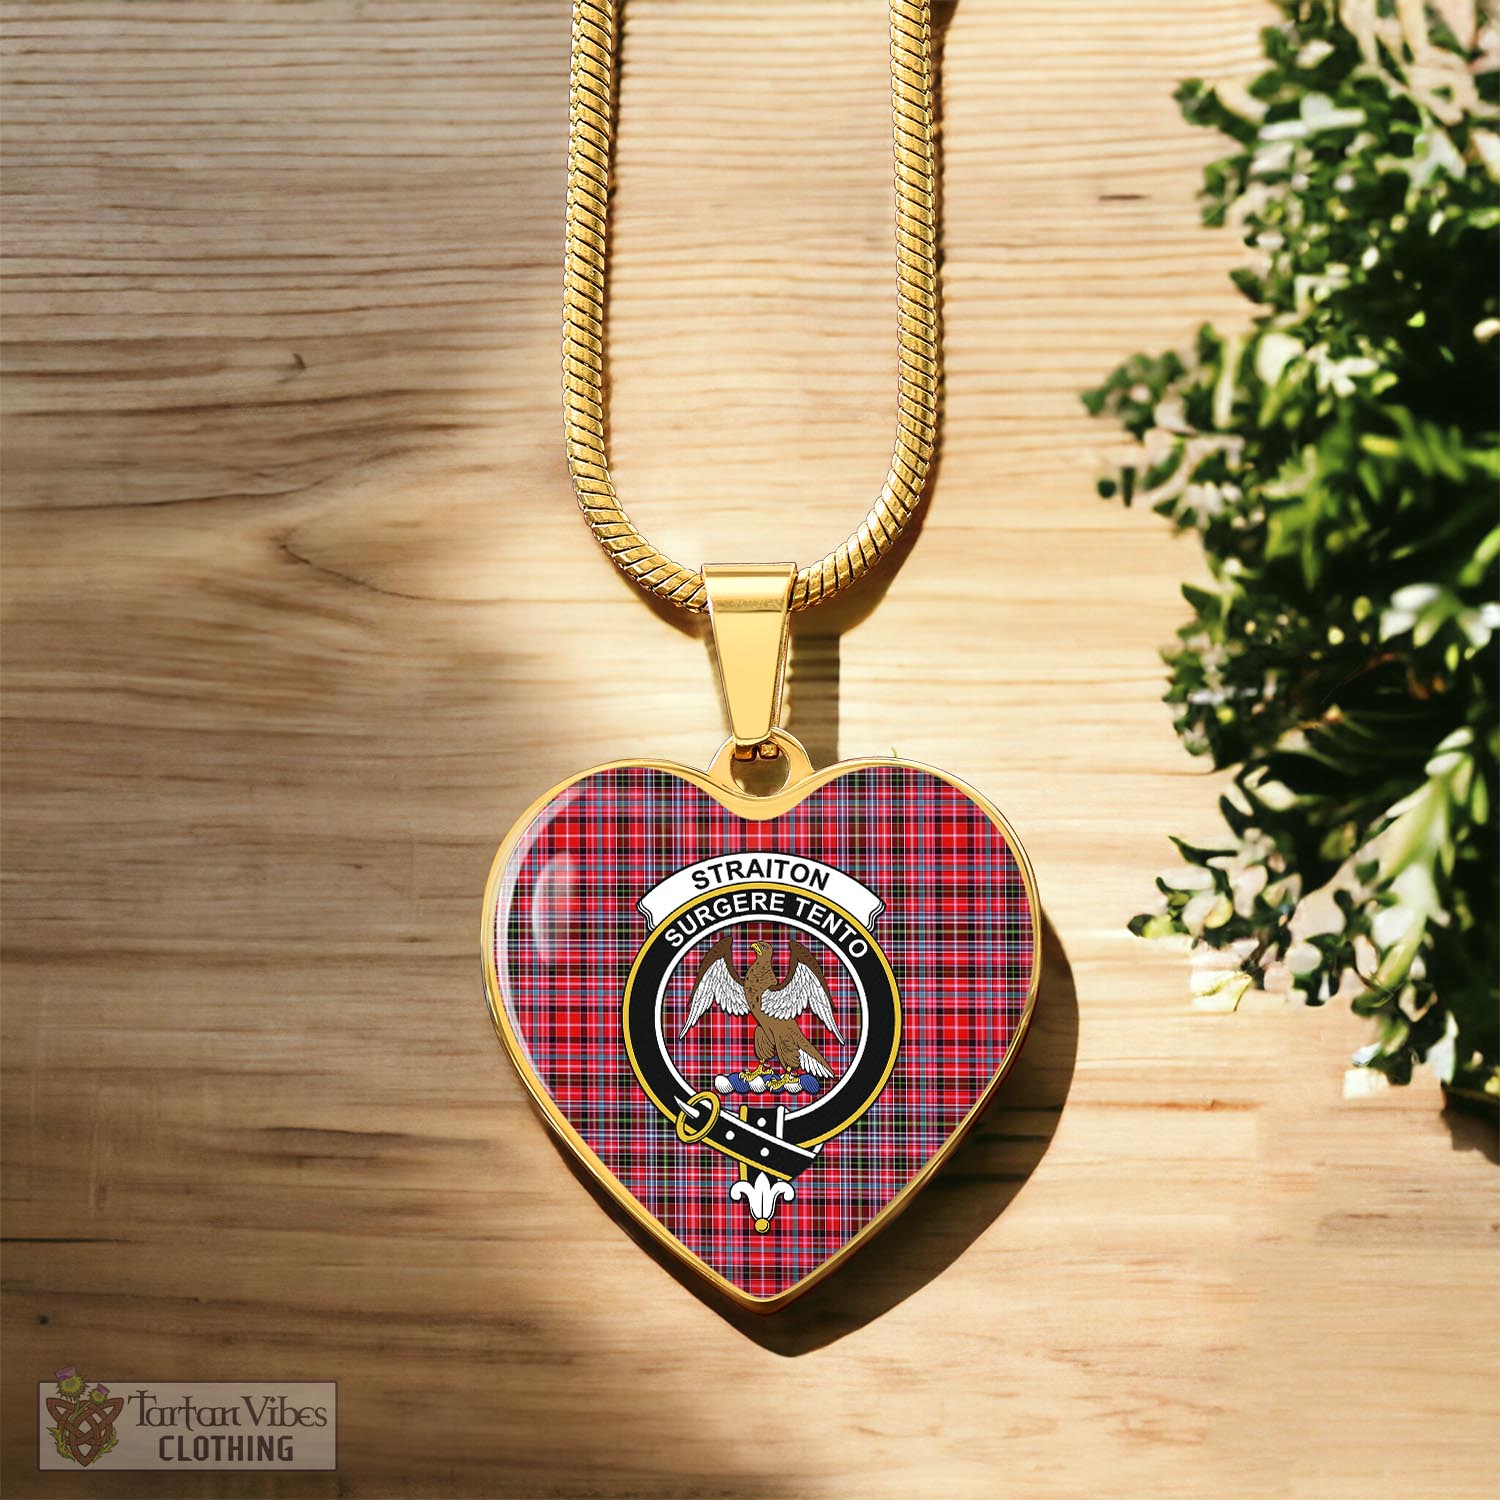 Tartan Vibes Clothing Straiton Tartan Heart Necklace with Family Crest